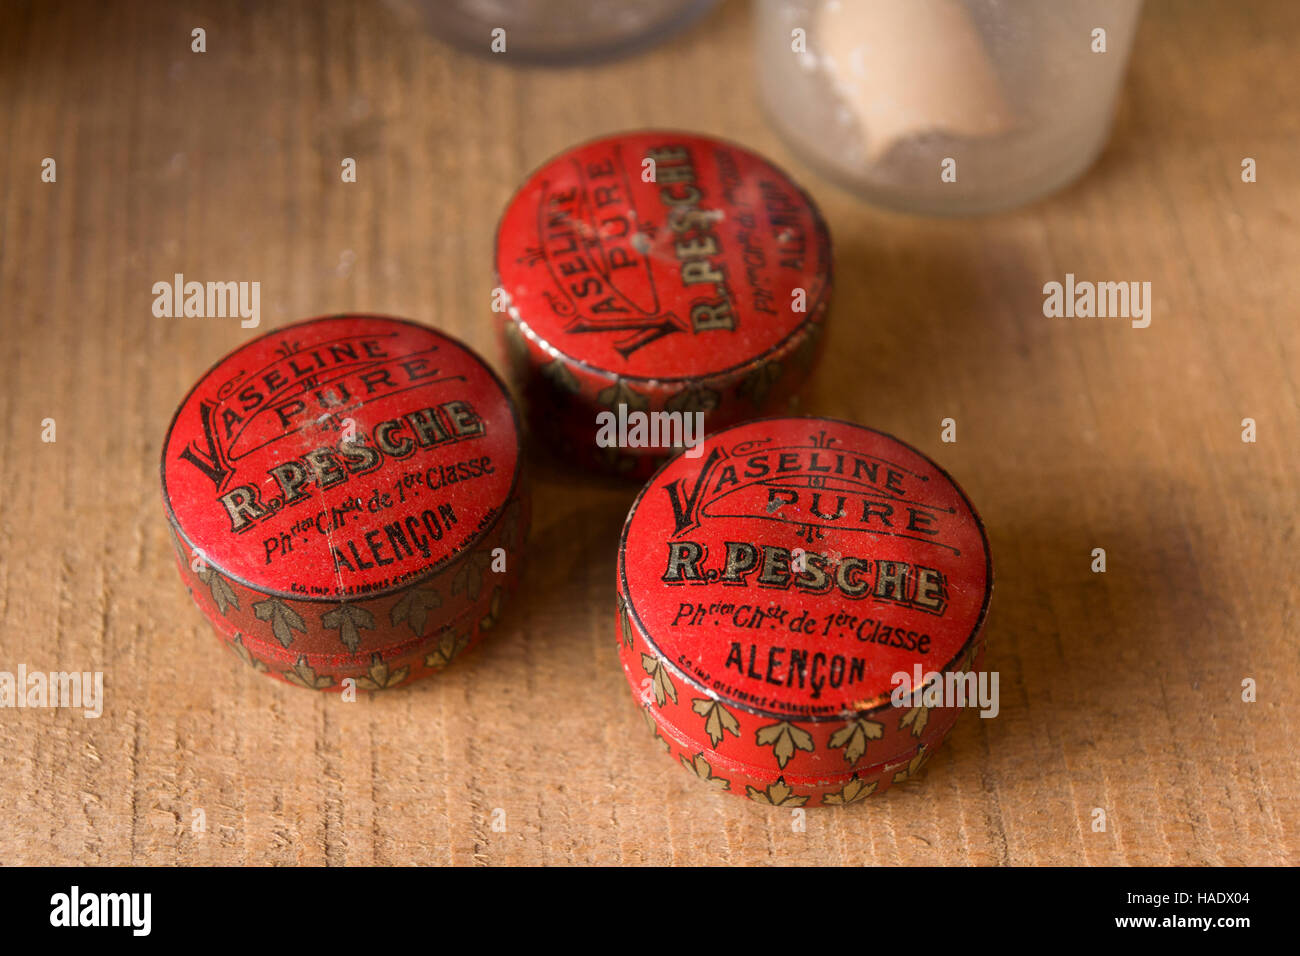 Old tins of pure Vaseline from French pharmacist, R.Pesche Stock Photo